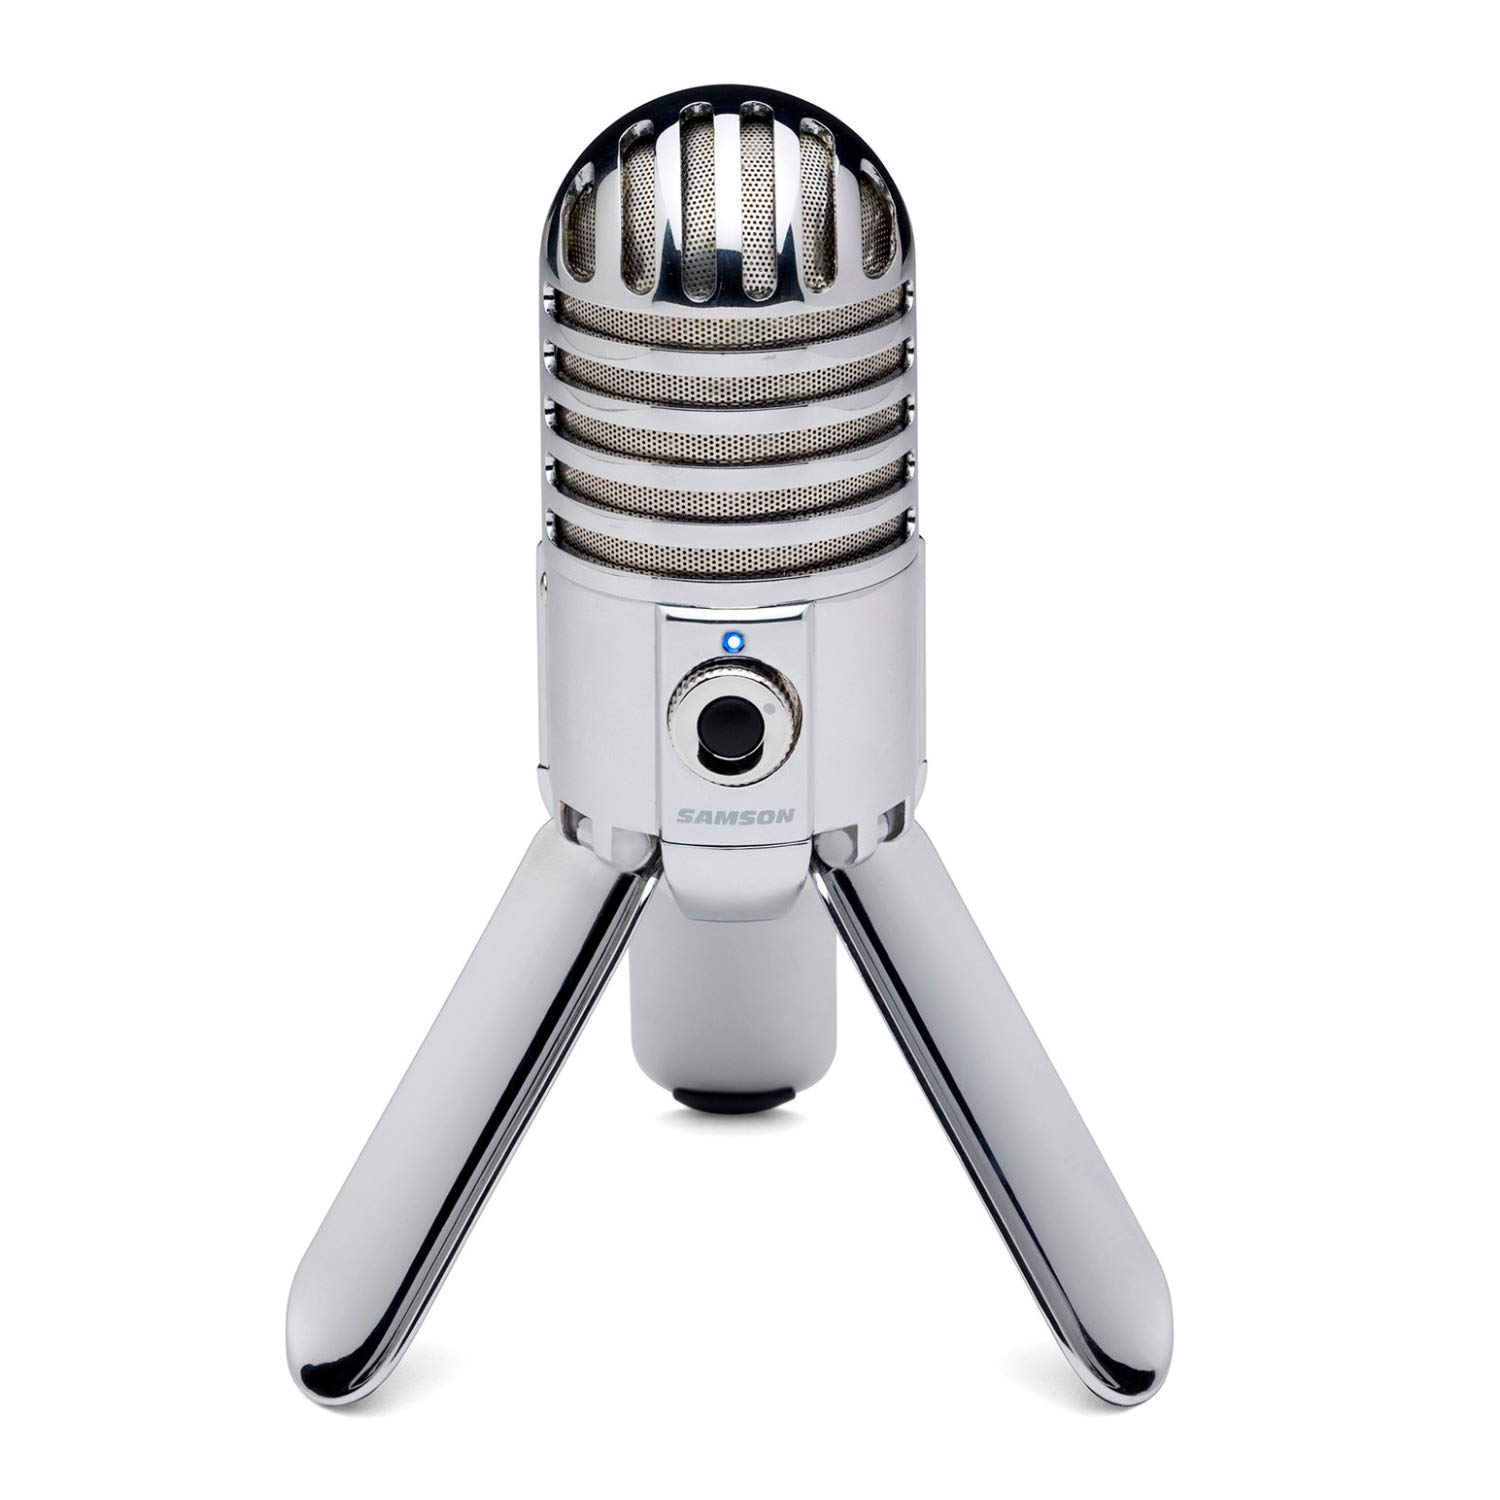 Samson Meteor Mic - Portable USB Studio Quality Condenser Microphone - High Performance, General Purpose/Podcast/Gaming/Music Recording Microphone, 16-bit, 44.1/48kHz resolution, Silver Chrome